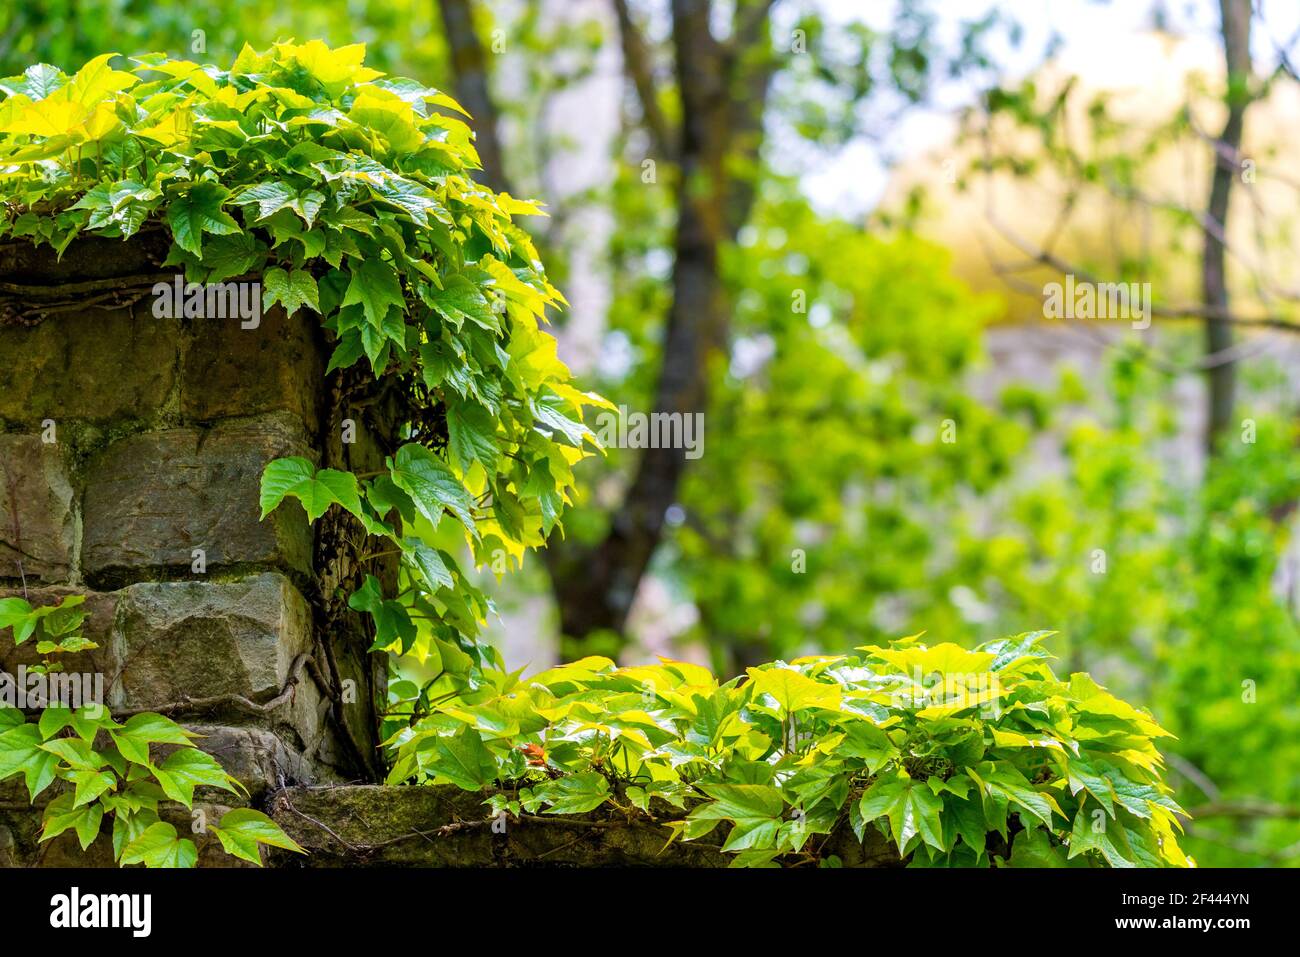 English Ivy or Hedera Helix is a clinging evergreen vine plant. Stock Photo